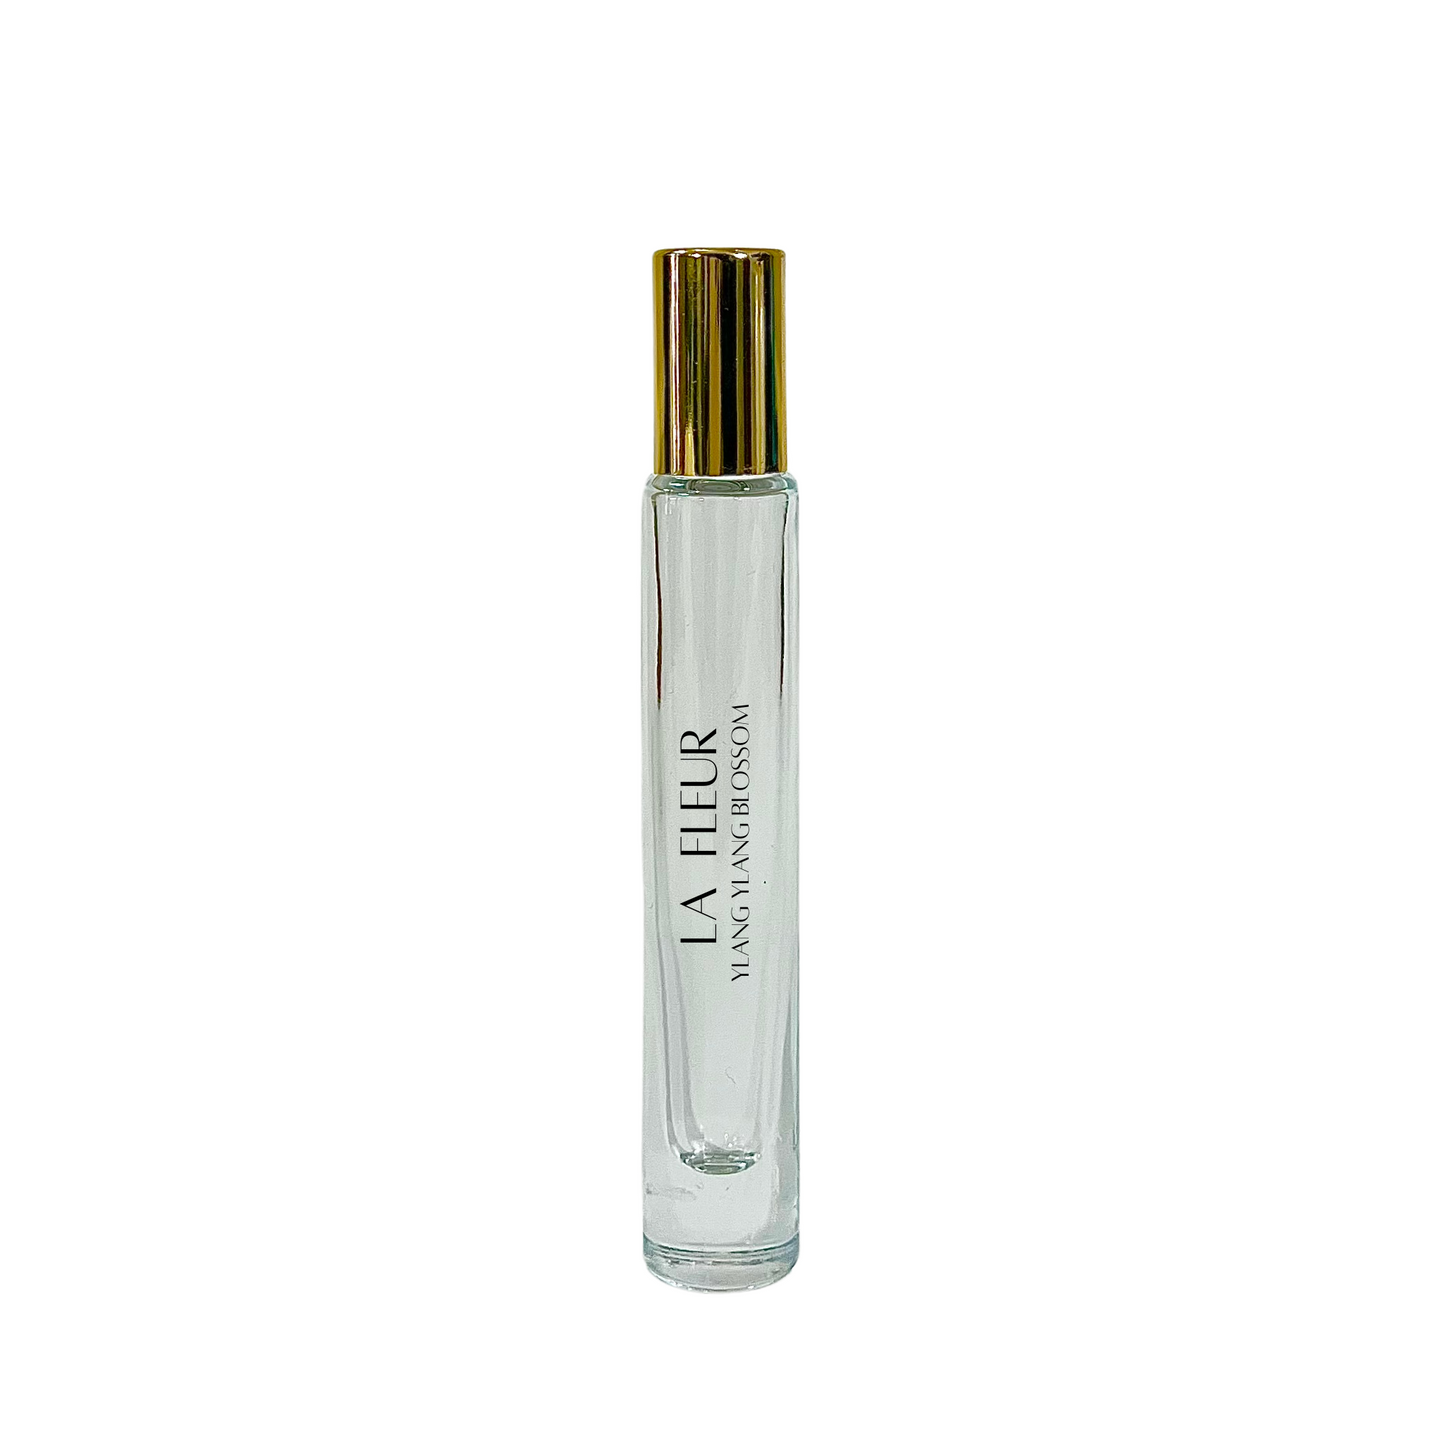 LA FLEUR YLANG YLANG BLOSSOM (Inspired by CHANEL MADEMOISELLE ) BODY OIL